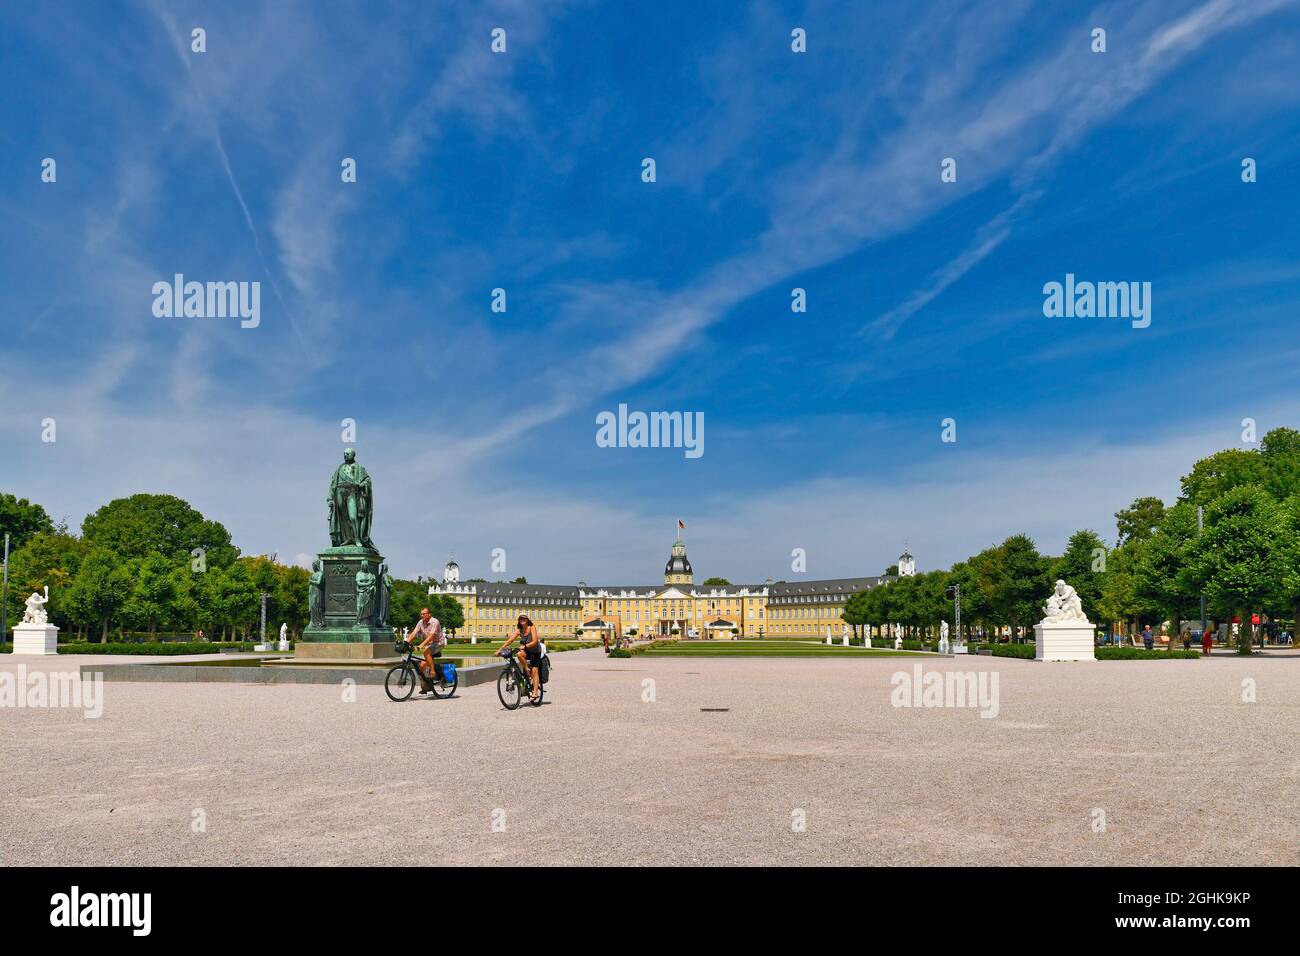 Karlsruhe, Germany - August 2021: Town square called 'Schlosplatz' in front of  baroque Karlsruhe Palace with garden Stock Photo